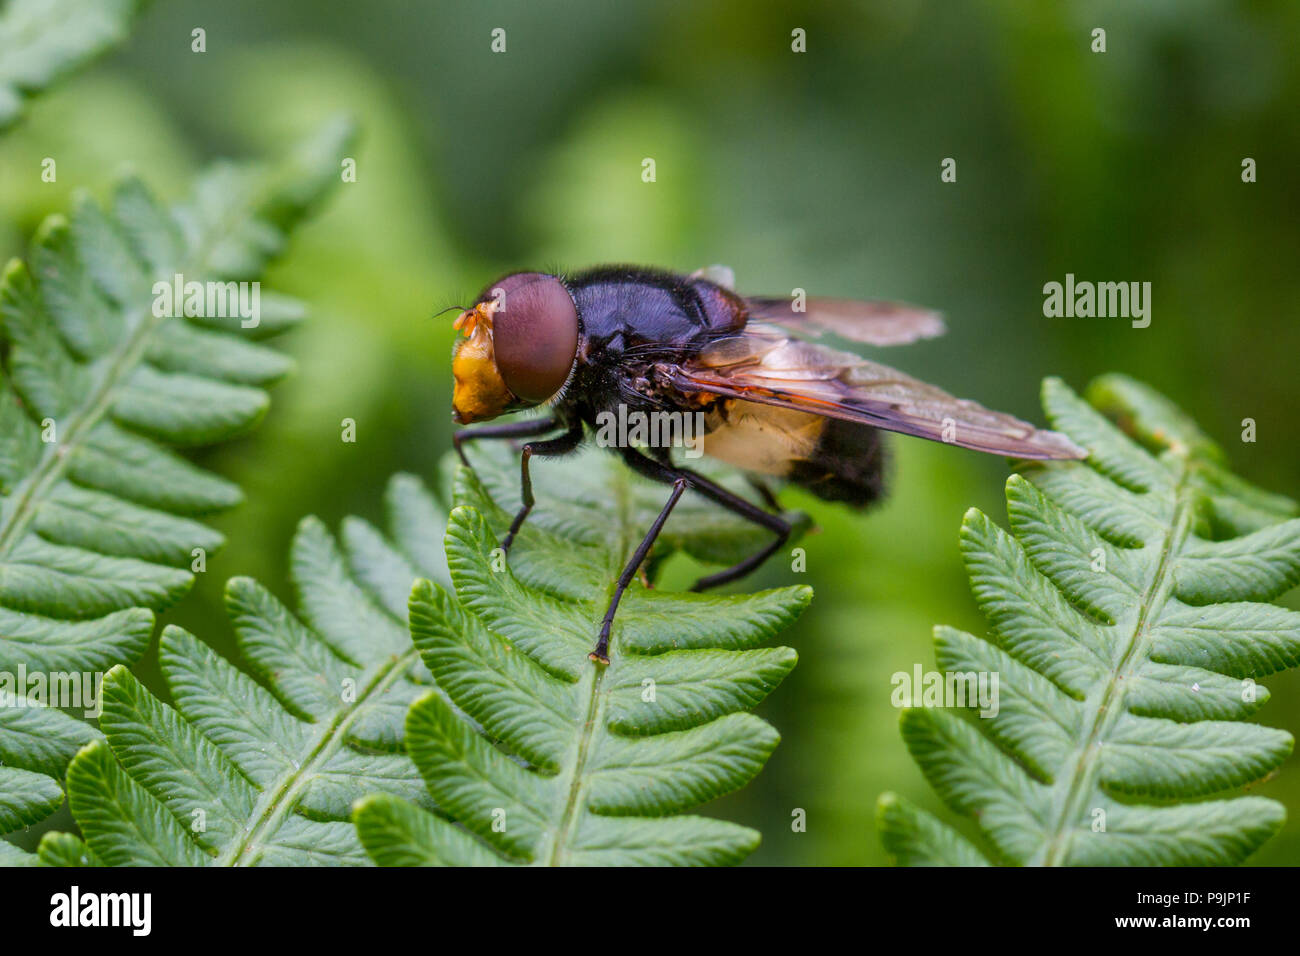 UK Wildlife: The pellucid fly, a very large type of hoverfly Stock Photo